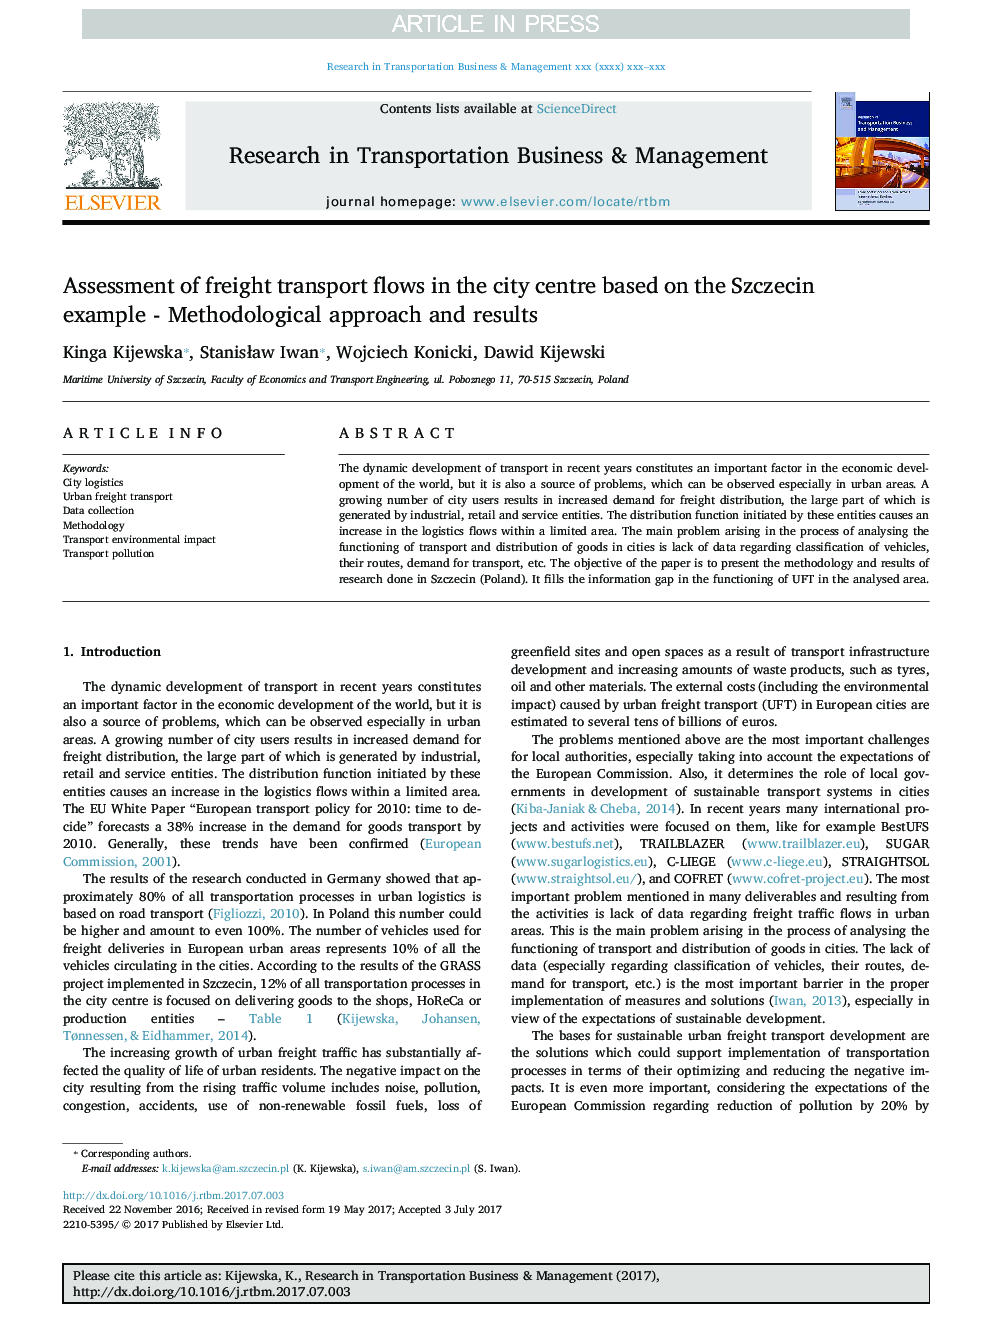 Assessment of freight transport flows in the city centre based on the Szczecin example - Methodological approach and results